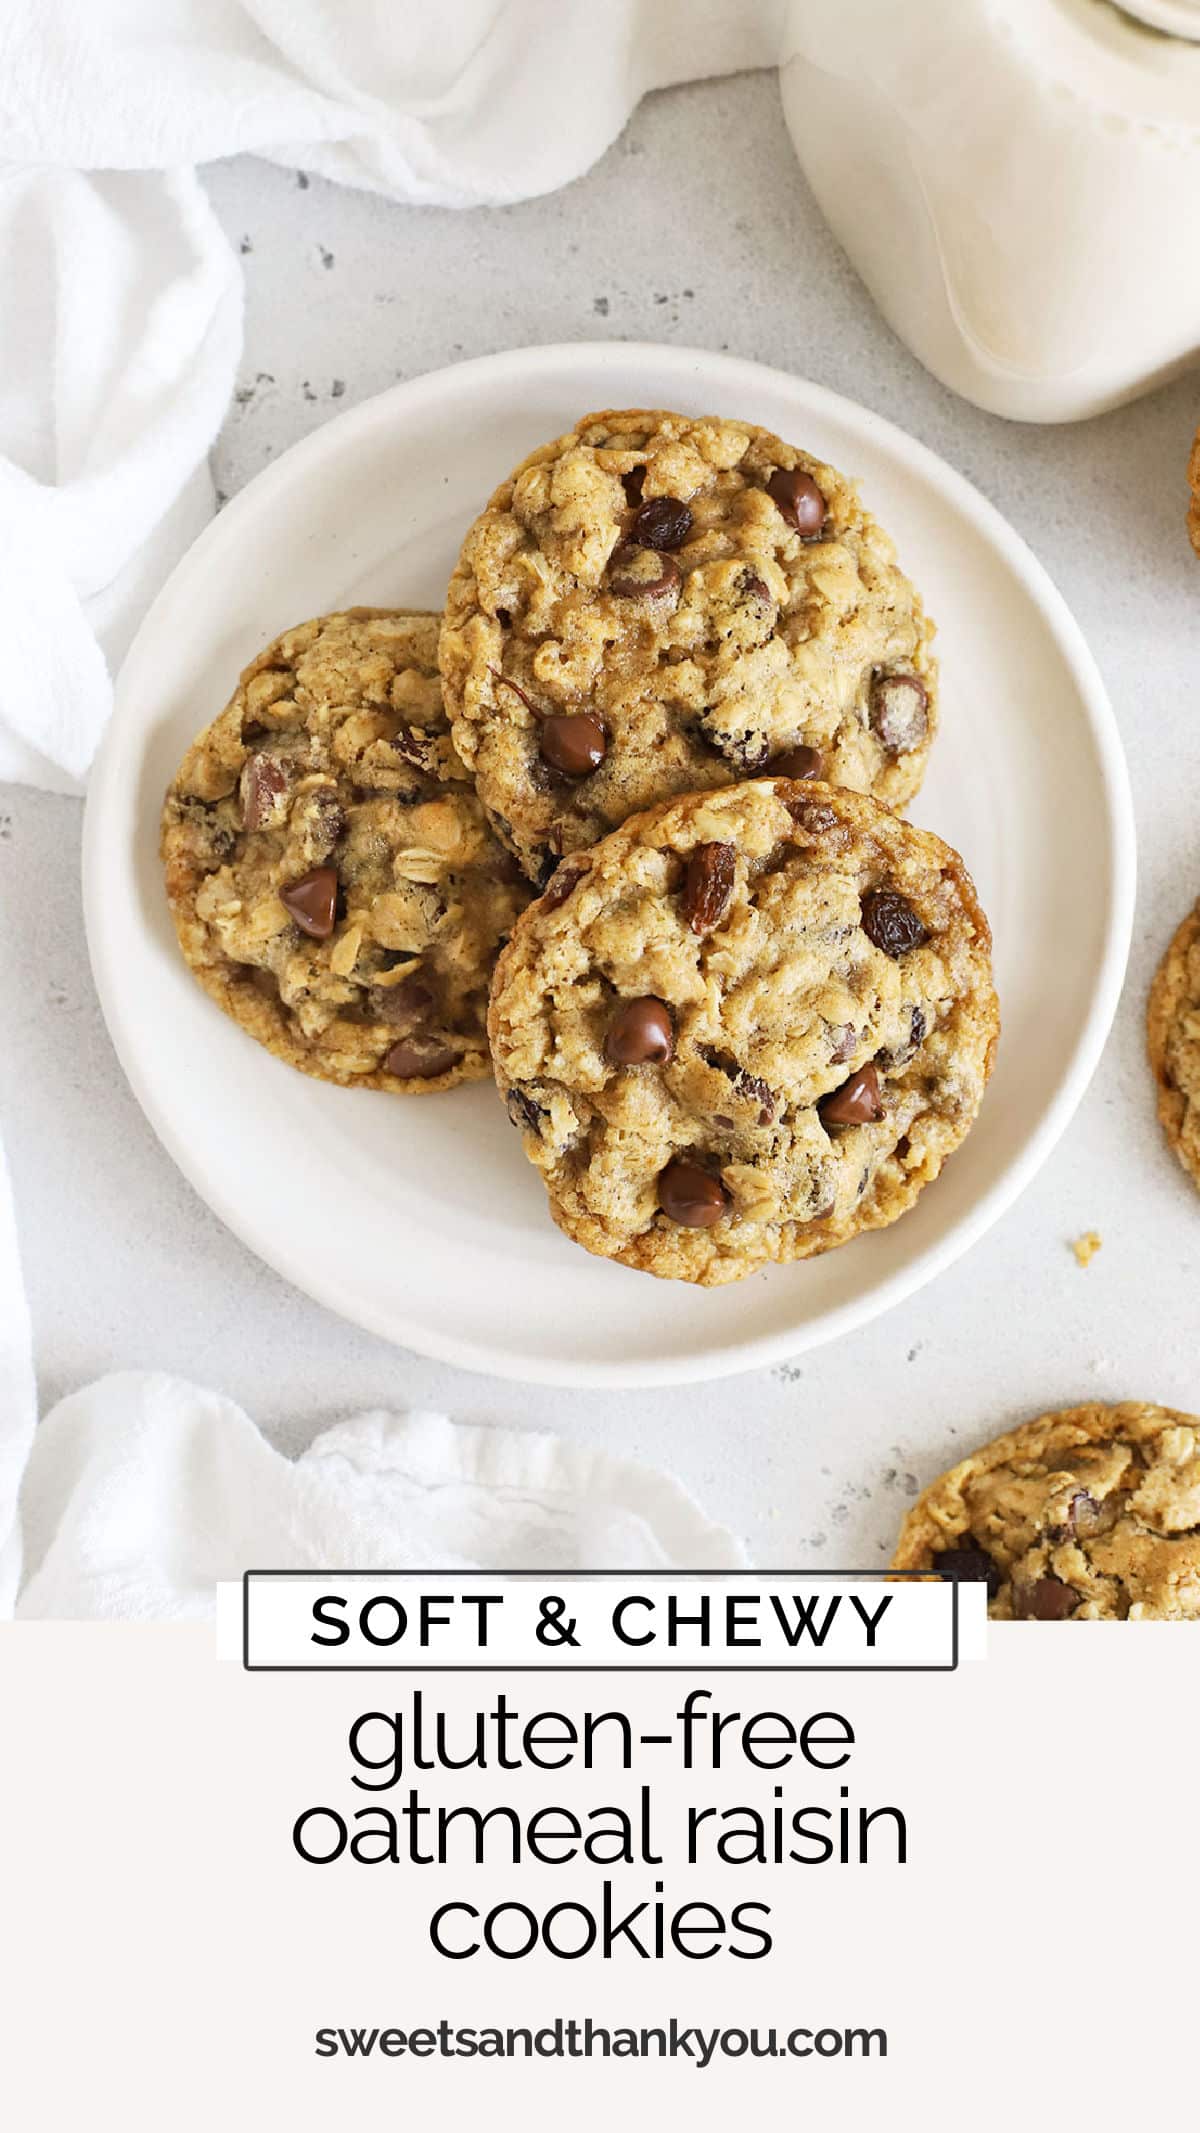 This soft, chewy gluten-free oatmeal raisin cookies recipe is the perfect one to satisfy your nostalgic cookie craving! Loaded with oats, raisins, cinnamon, and even some chocolate, it's easy, delicious, and classic! / gluten-free oatmeal raisin chocolate chip cookies / gluten-free oatmeal cookies / gluten-free cookie recipe / 